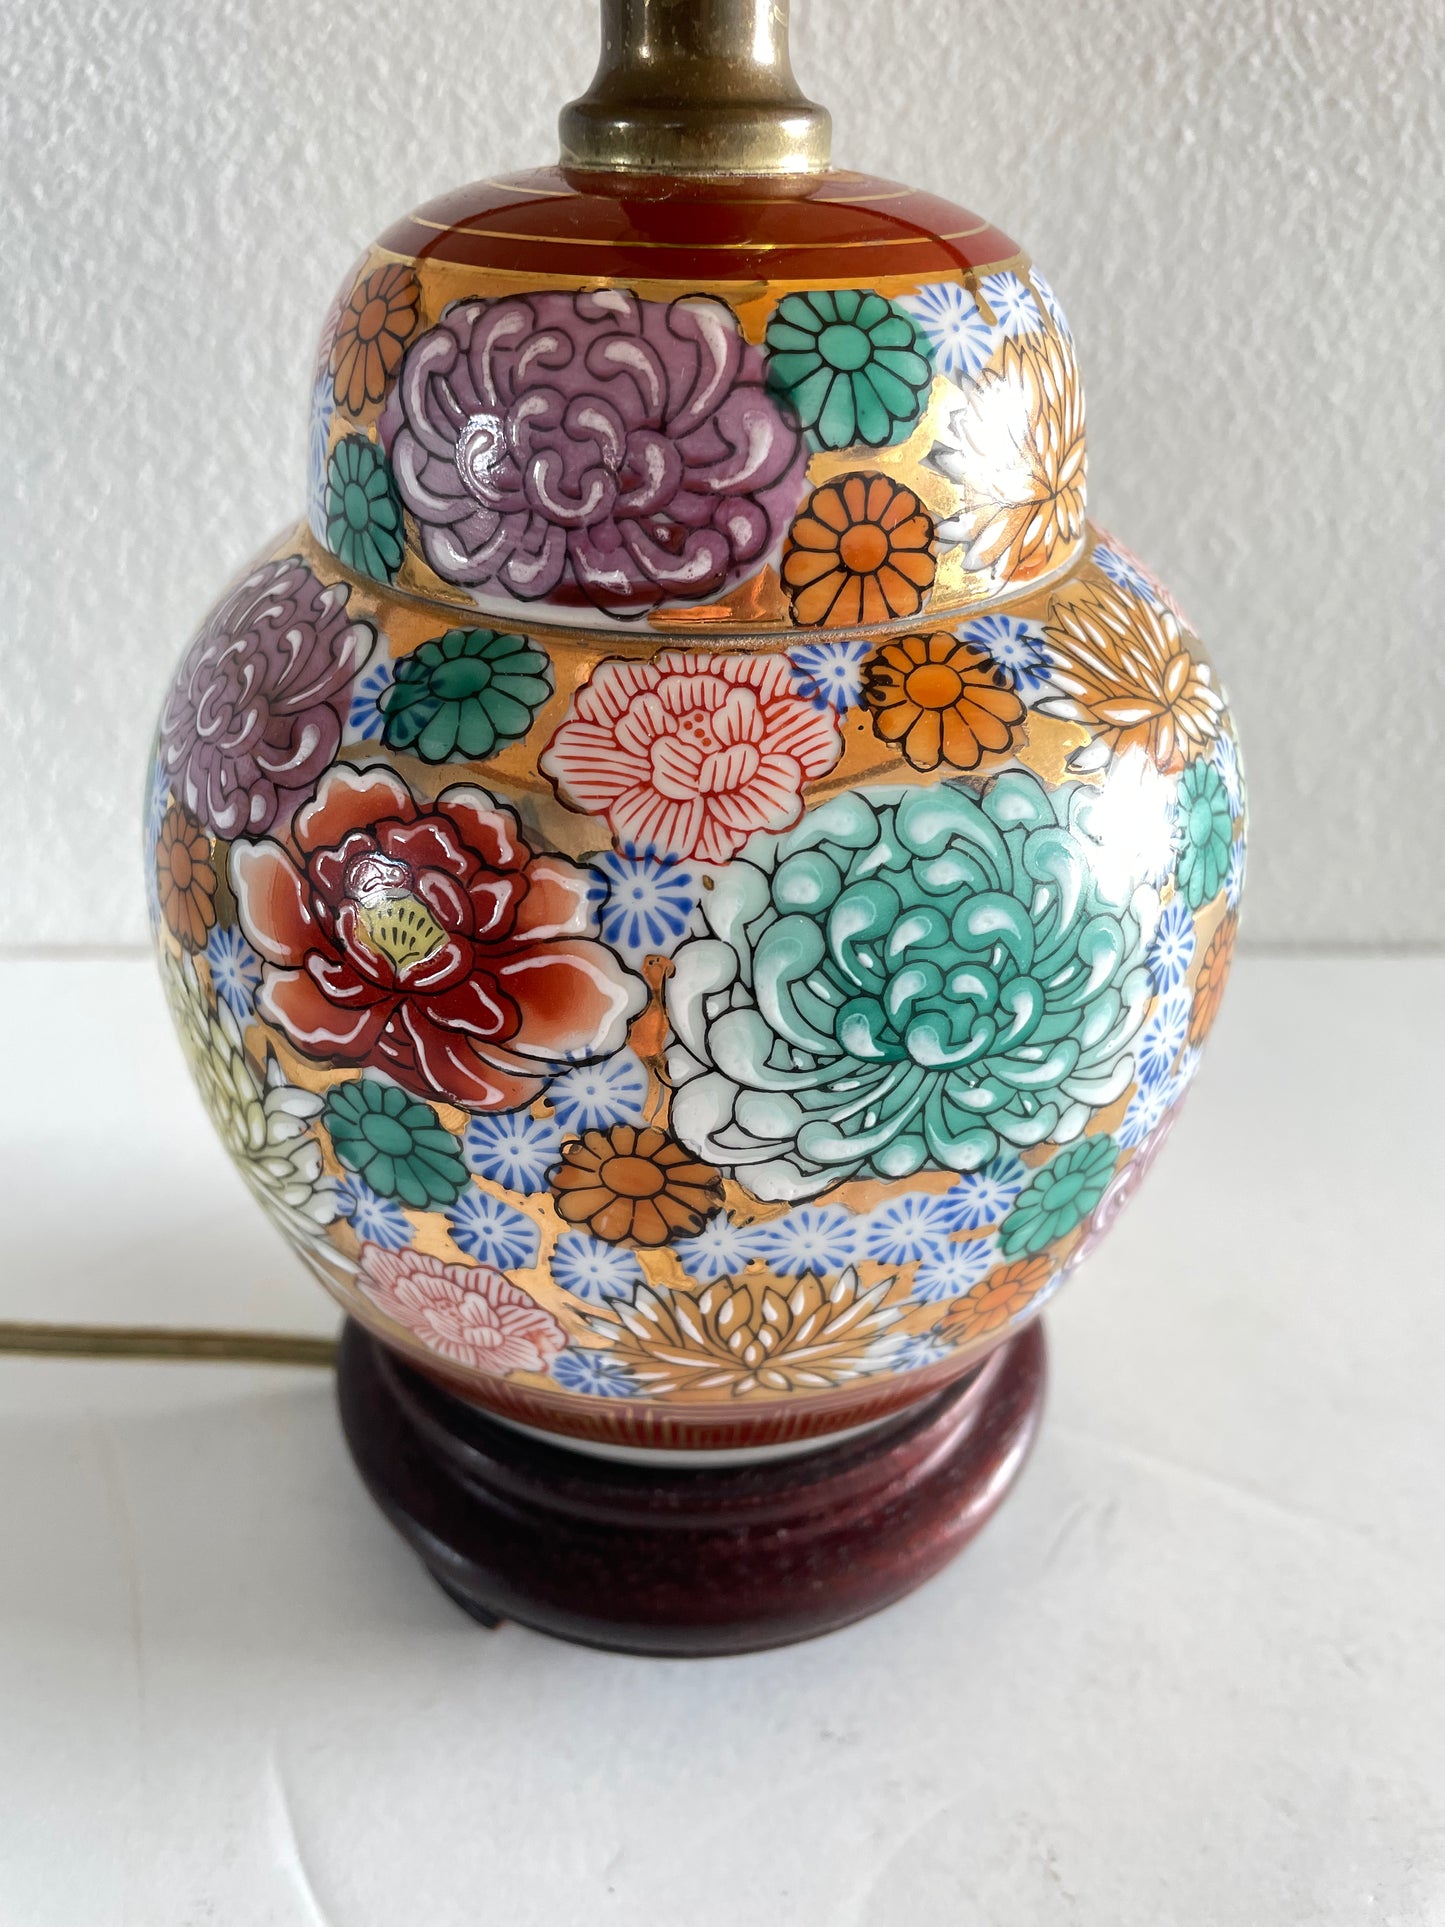 Mid-Century Chinoiserie Petite Floral Ceramic Ginger Jar Table Lamp With Shade